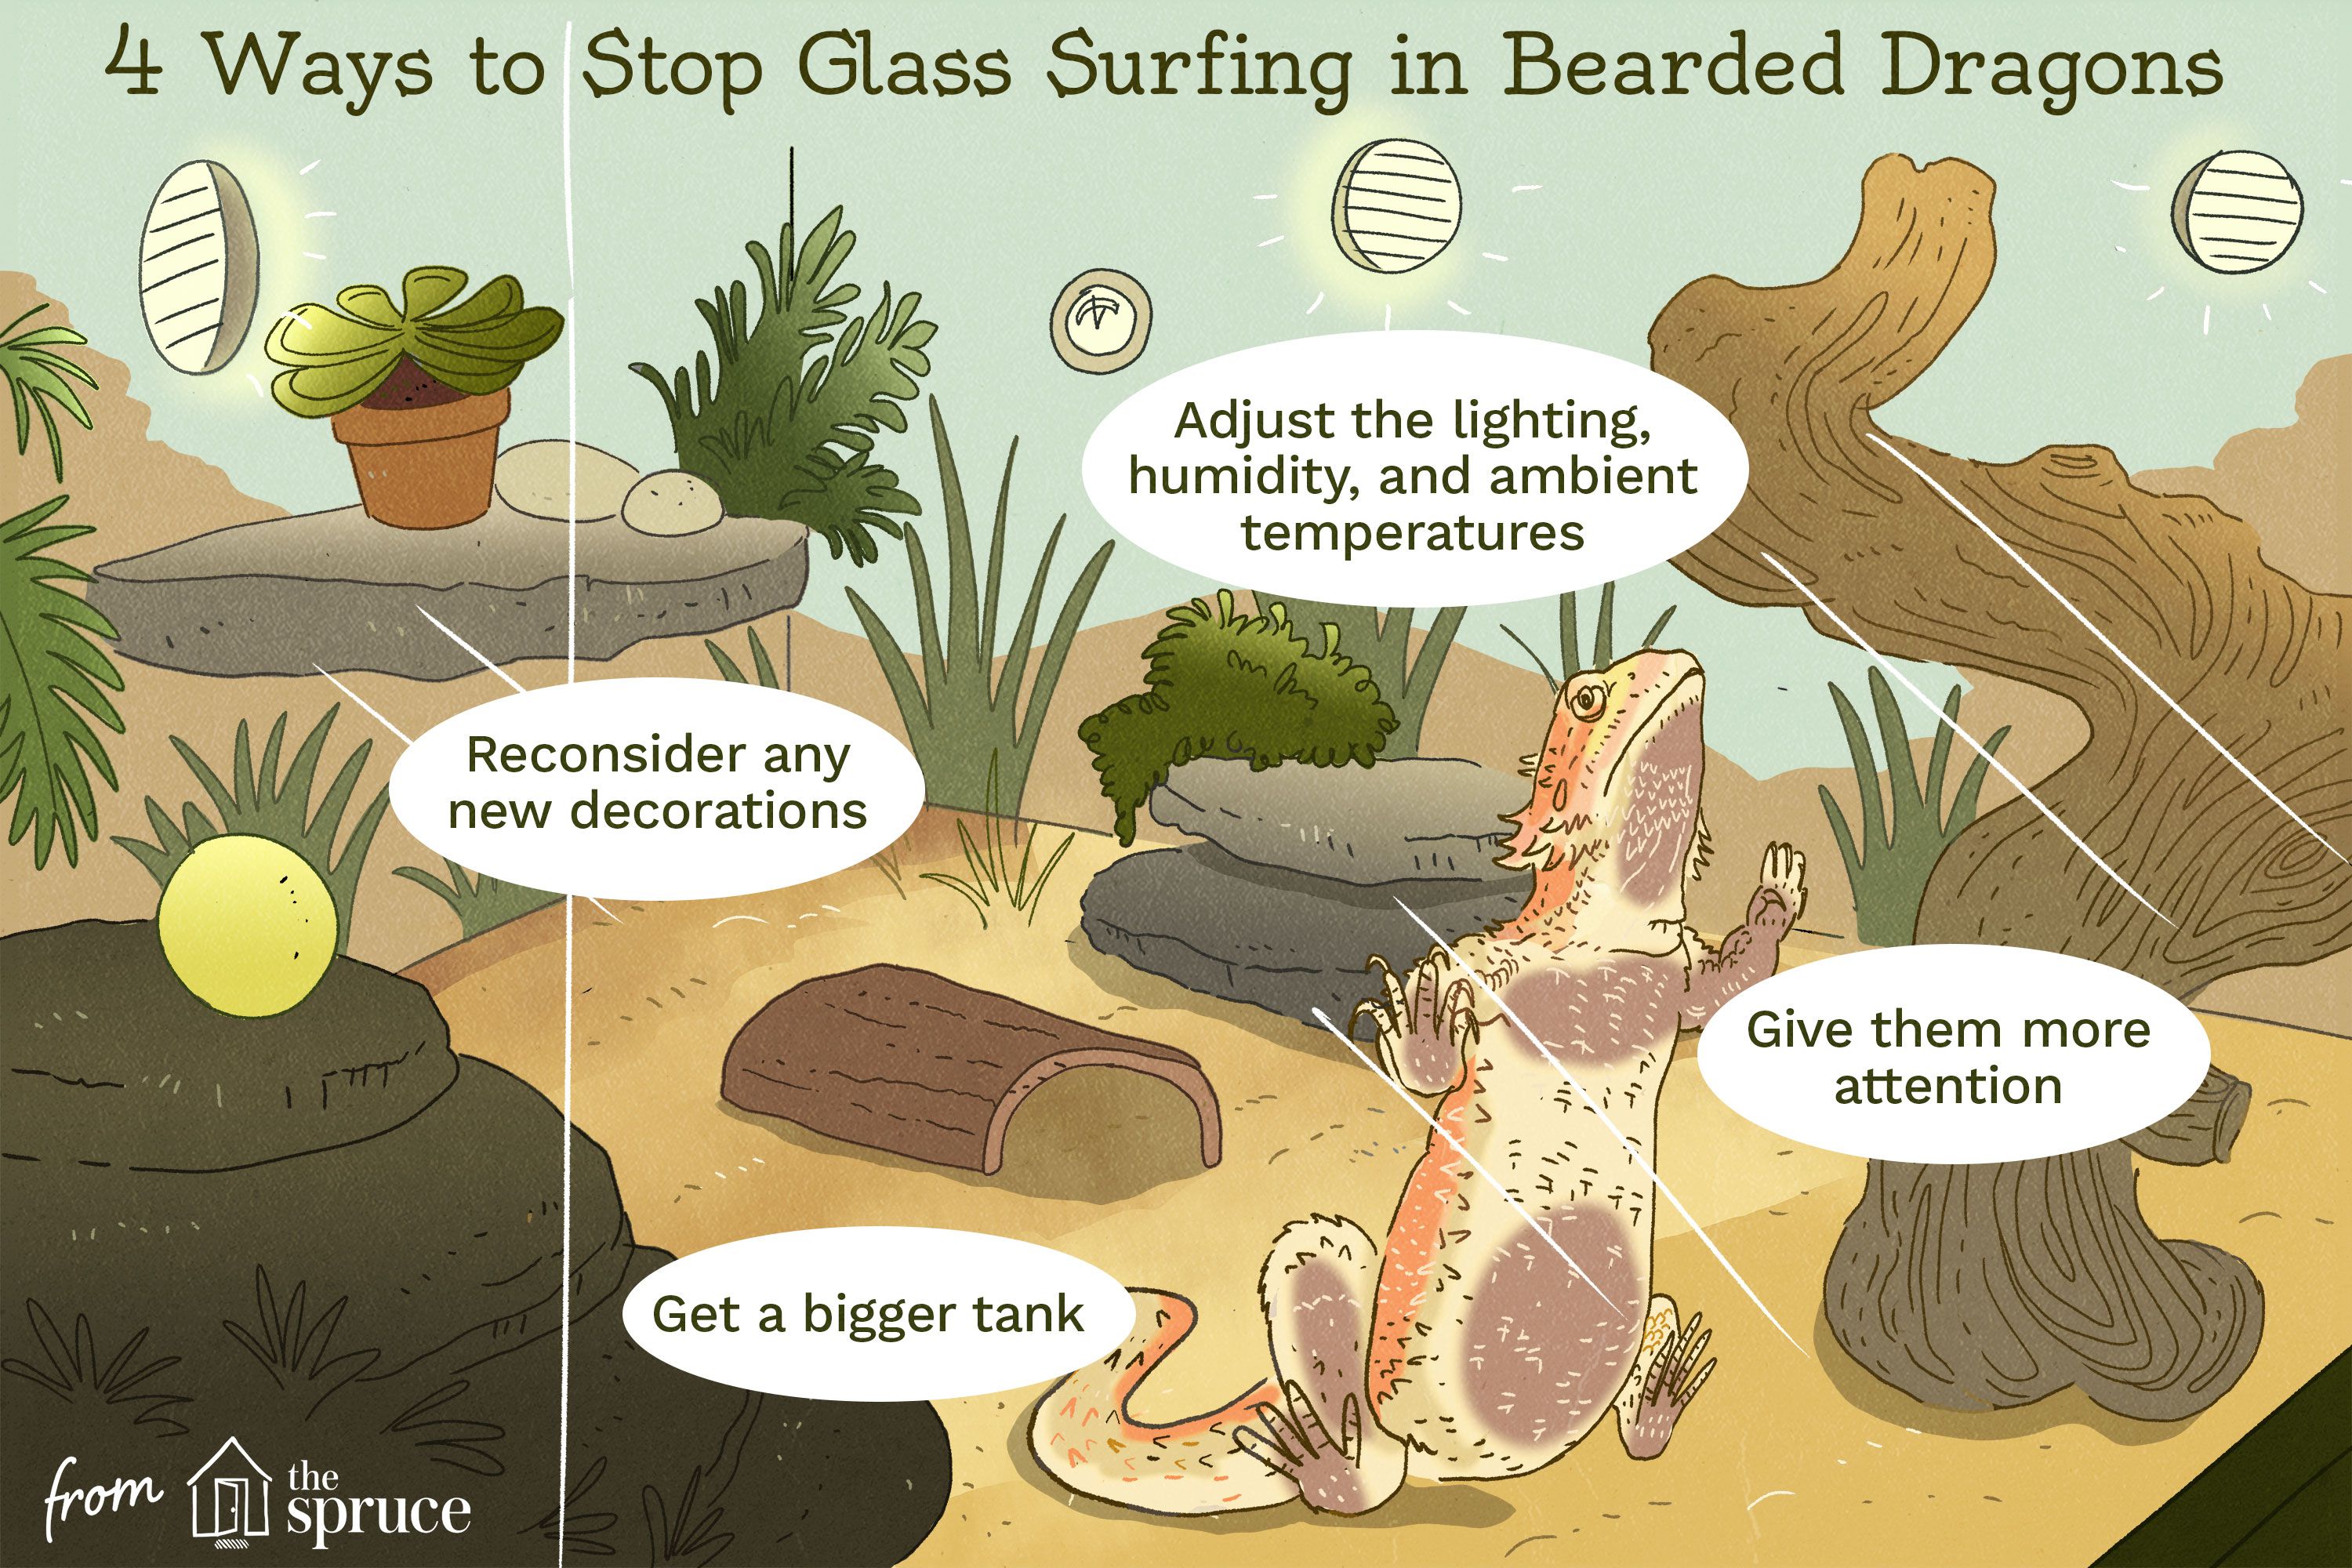 Why Does My Bearded Dragon Glass Surf?